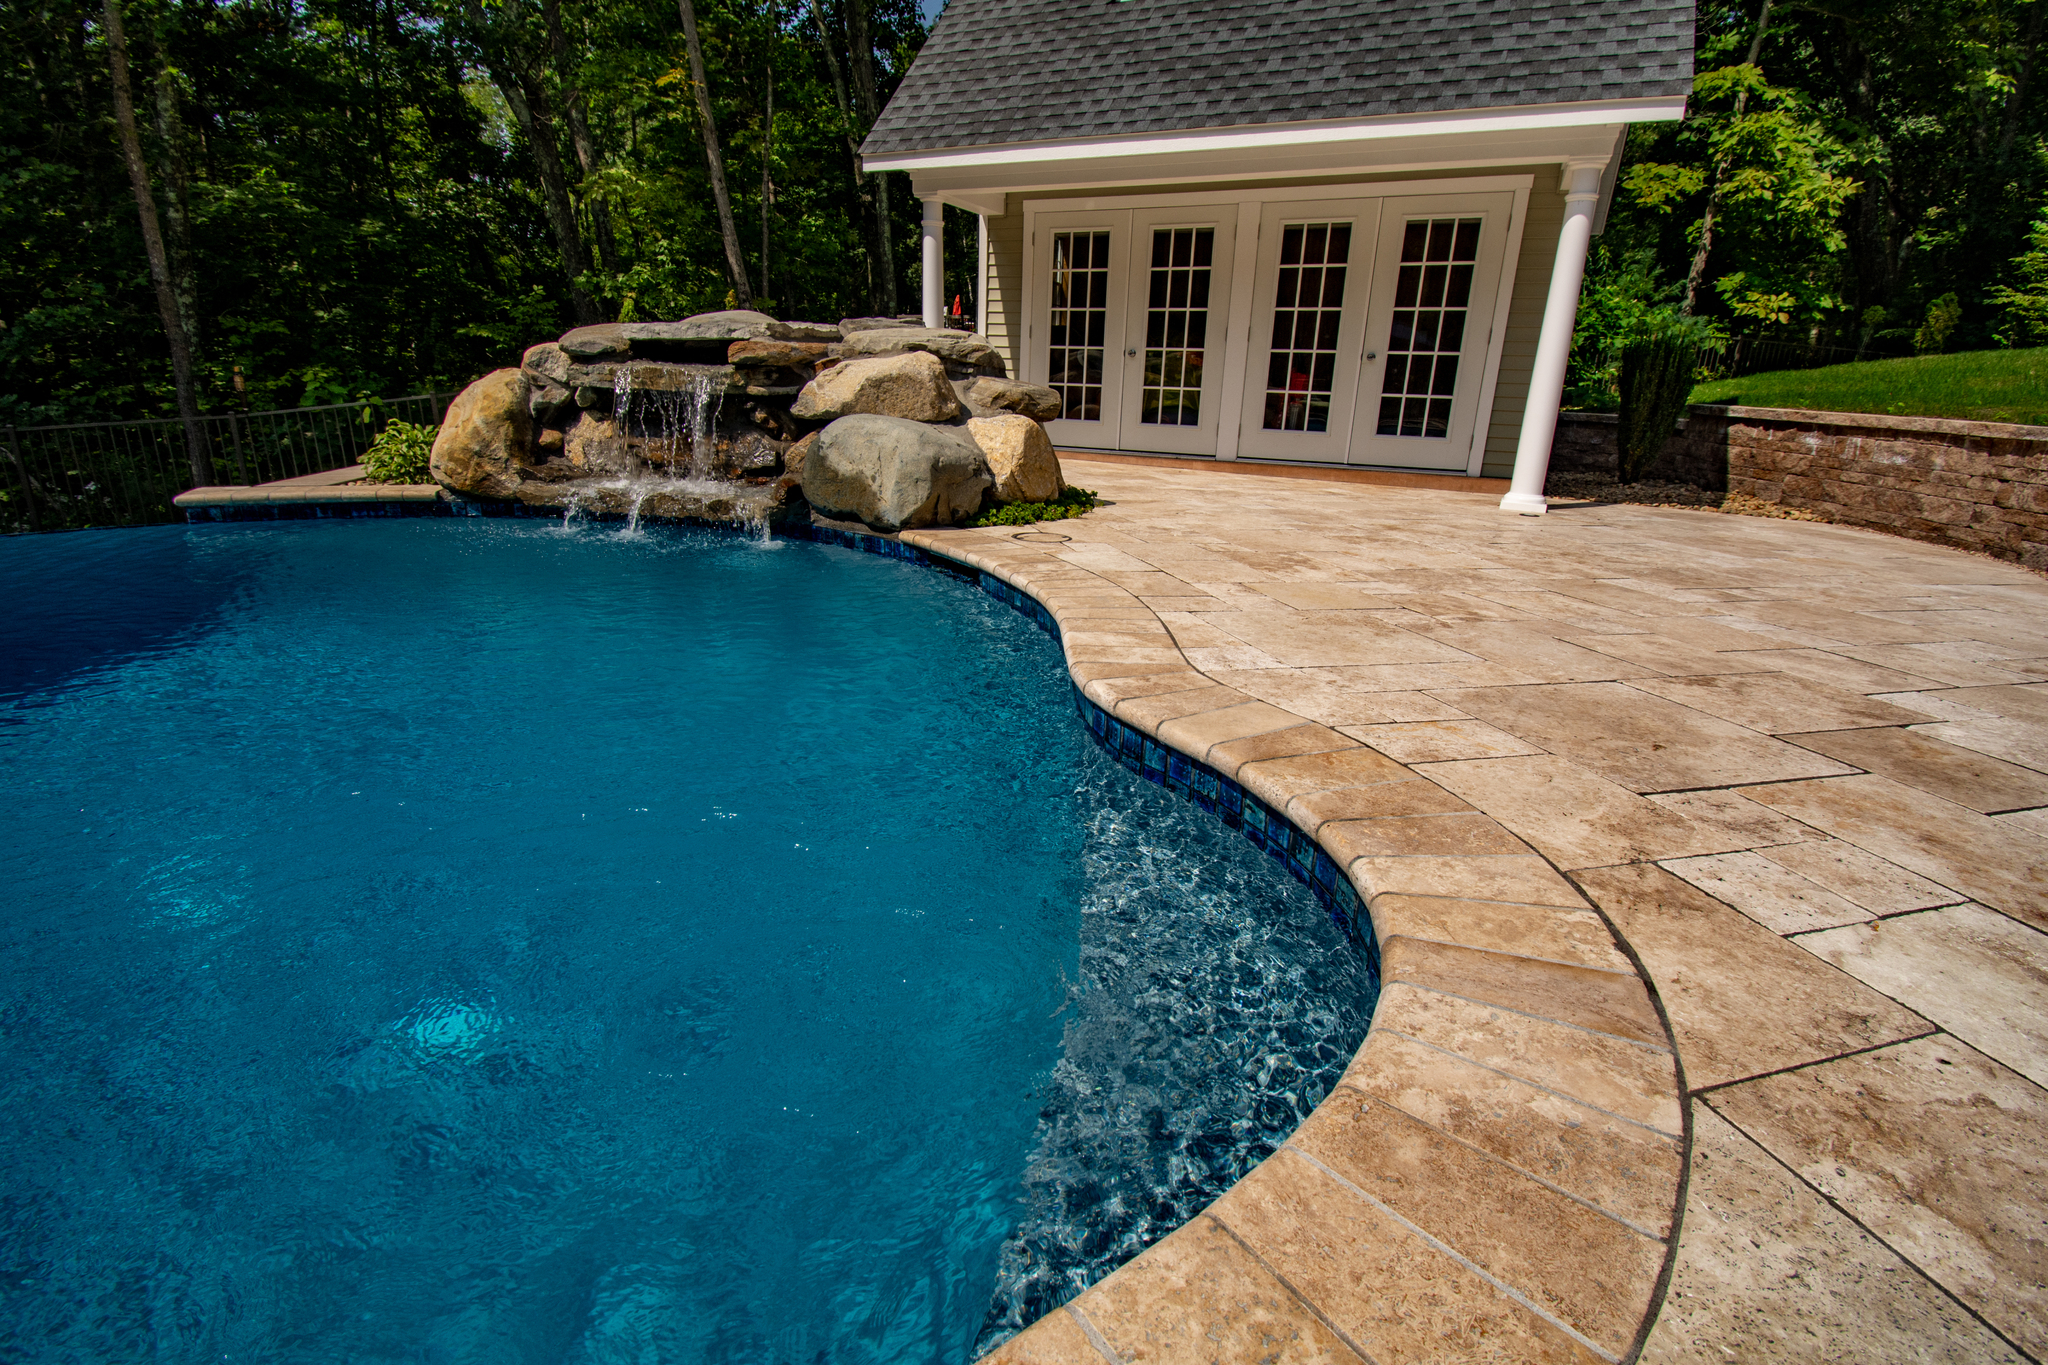 Pool Coping Tile Triad Associates, Can You Use Any Tile In A Pool